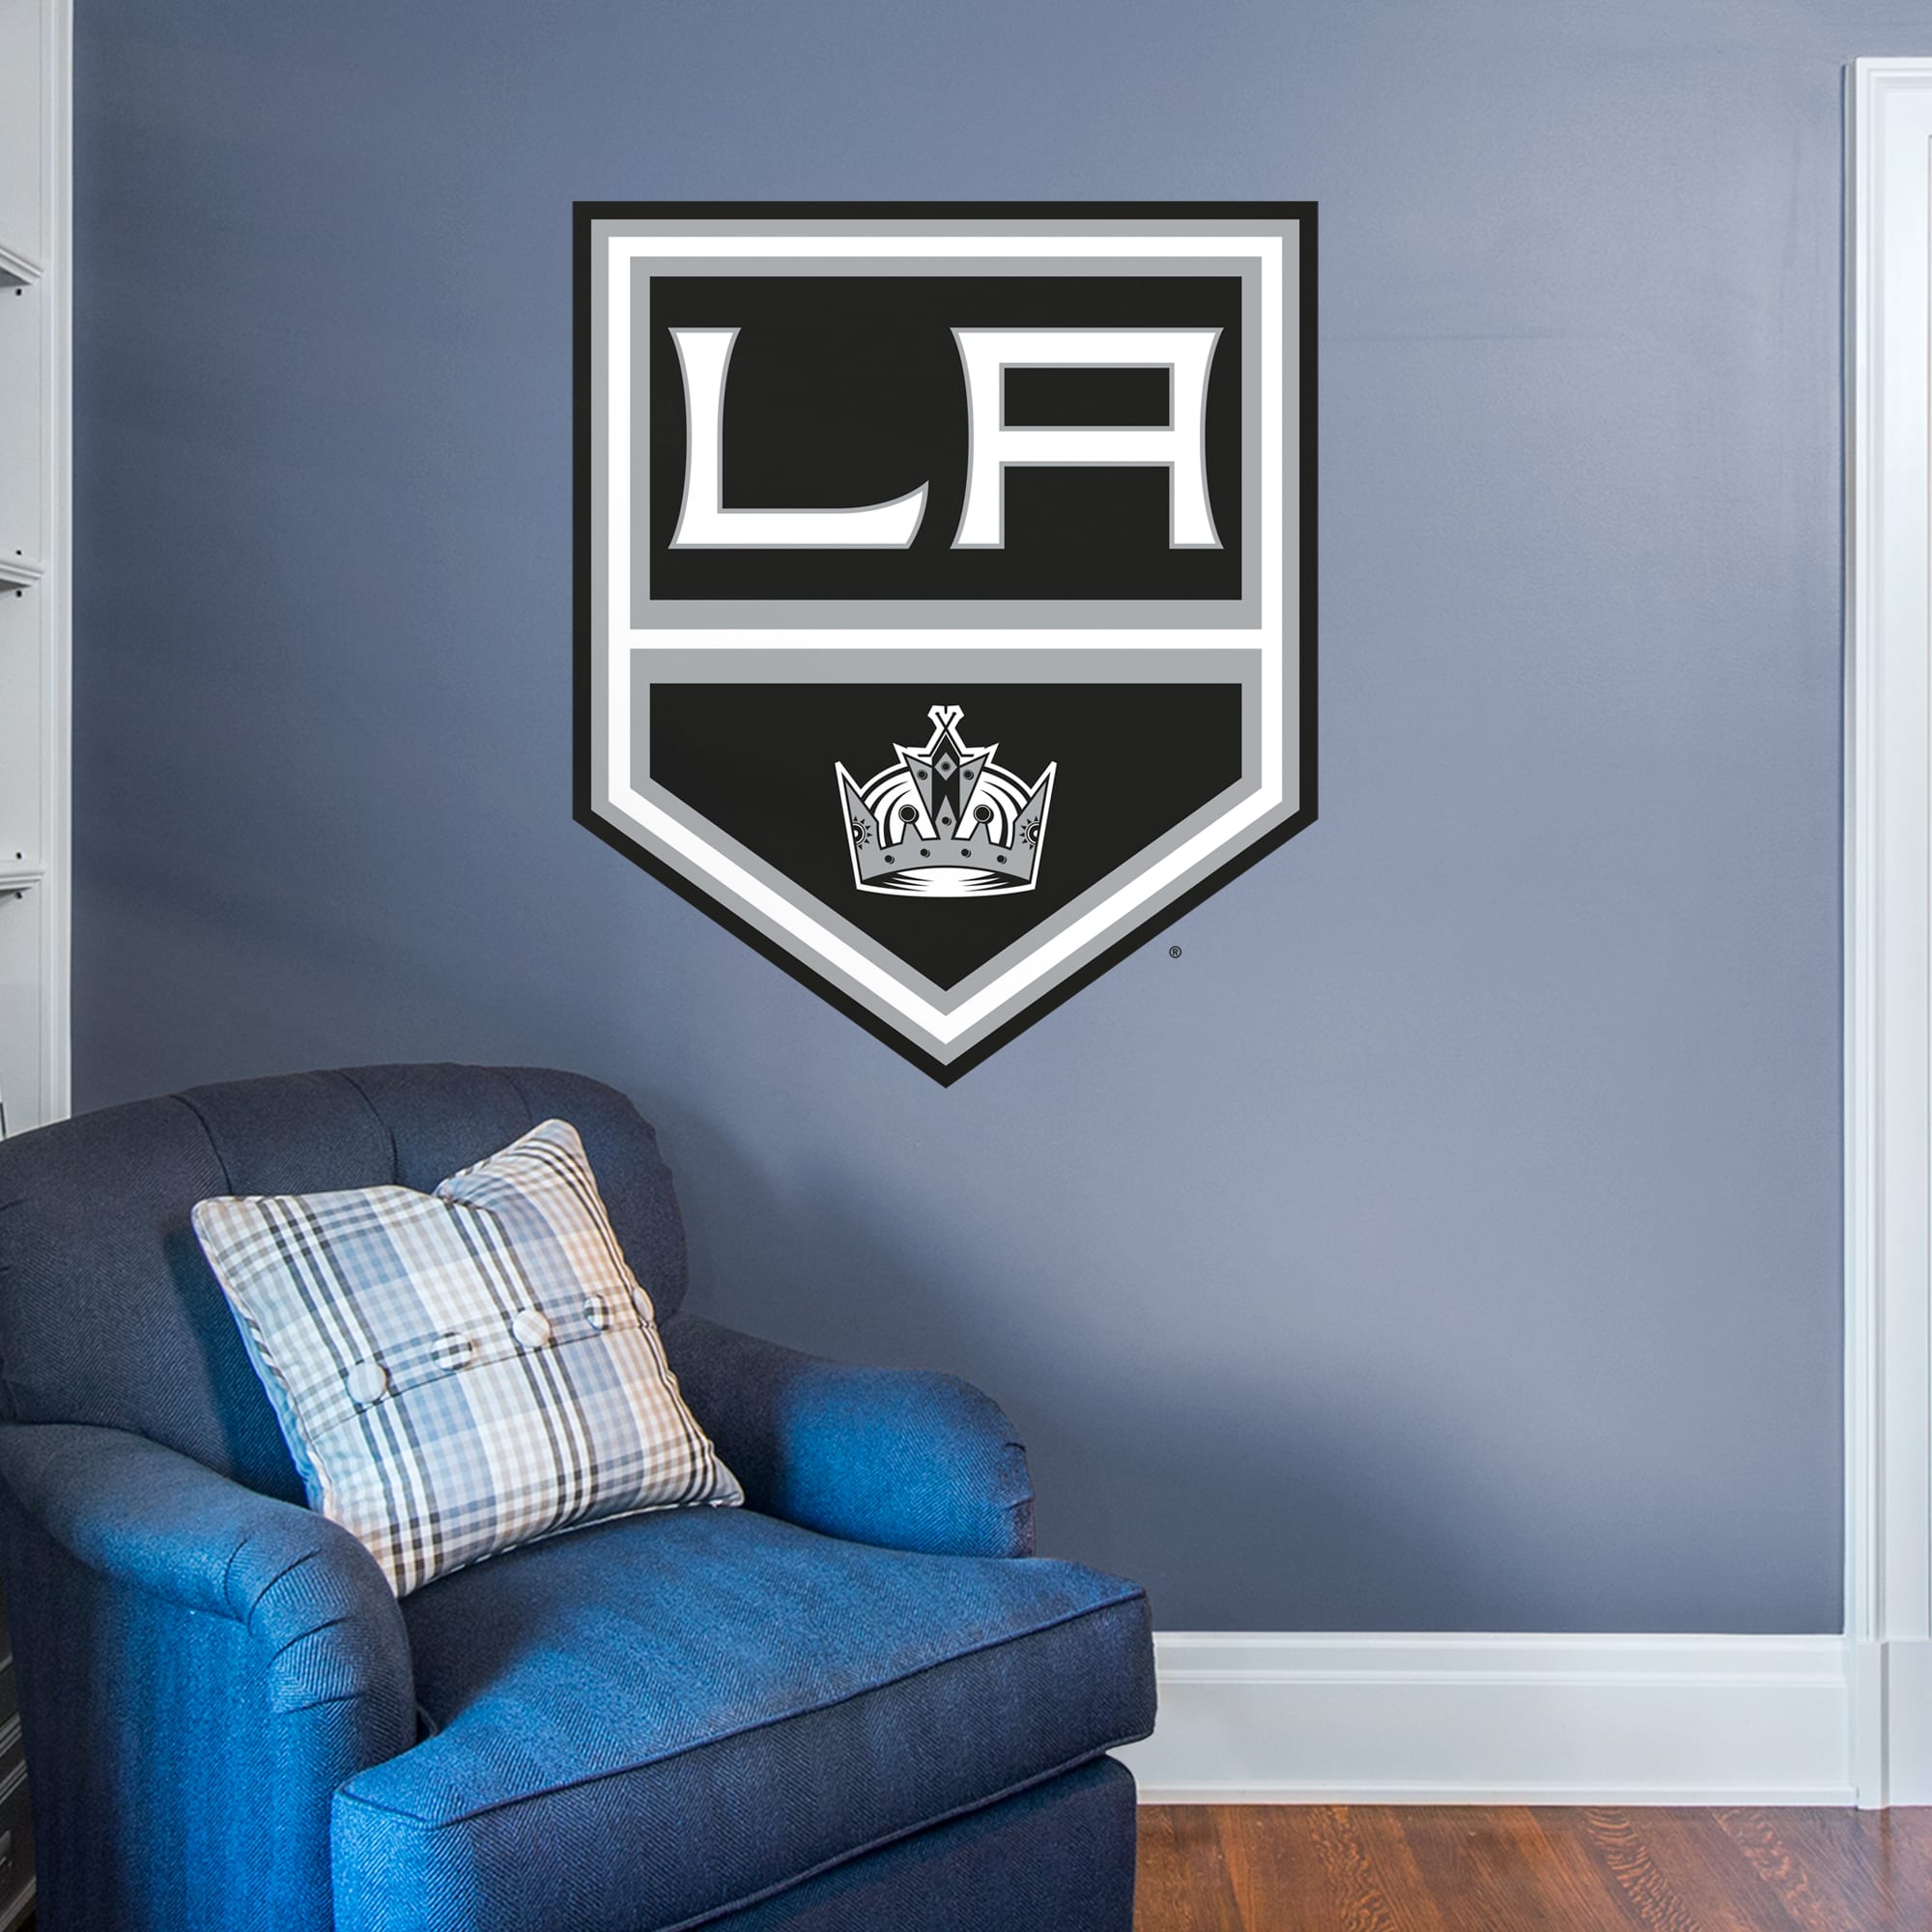 Los Angeles Kings: Logo - Officially Licensed NHL Removable Wall Decal Giant Logo (38"W x 46"H) by Fathead | Vinyl